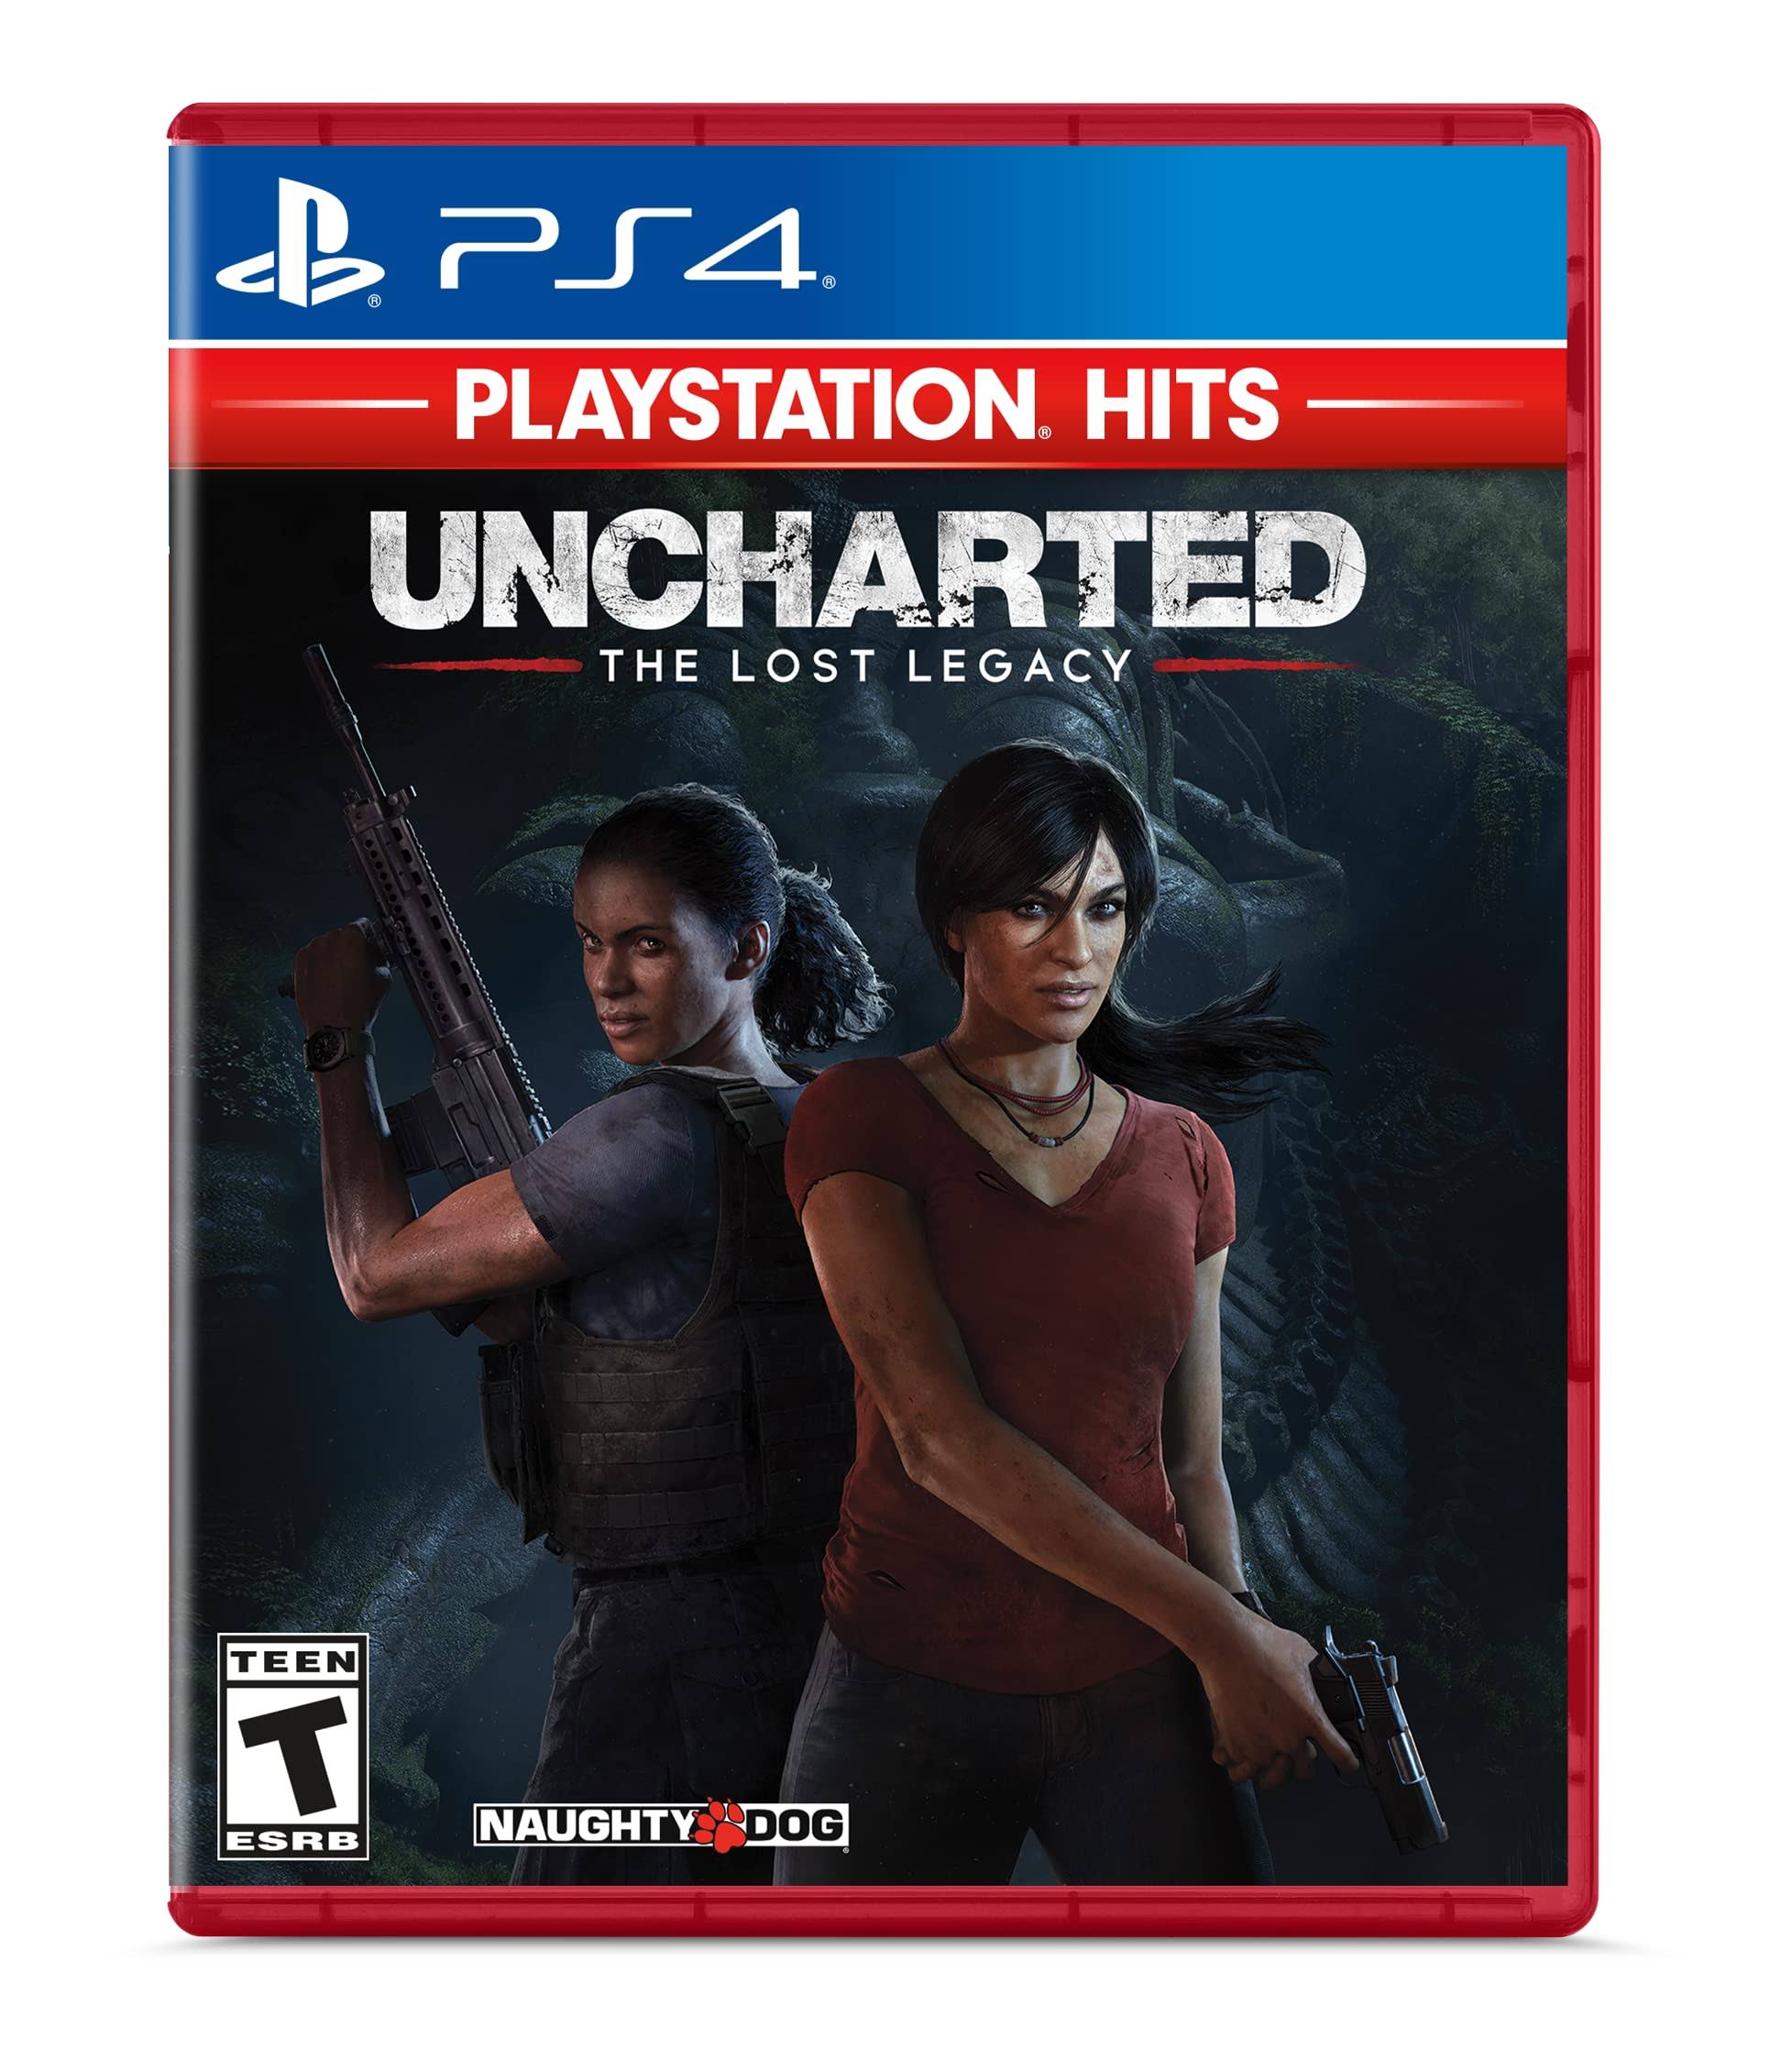 Uncharted: The Lost Legacy (PlayStation Hits)